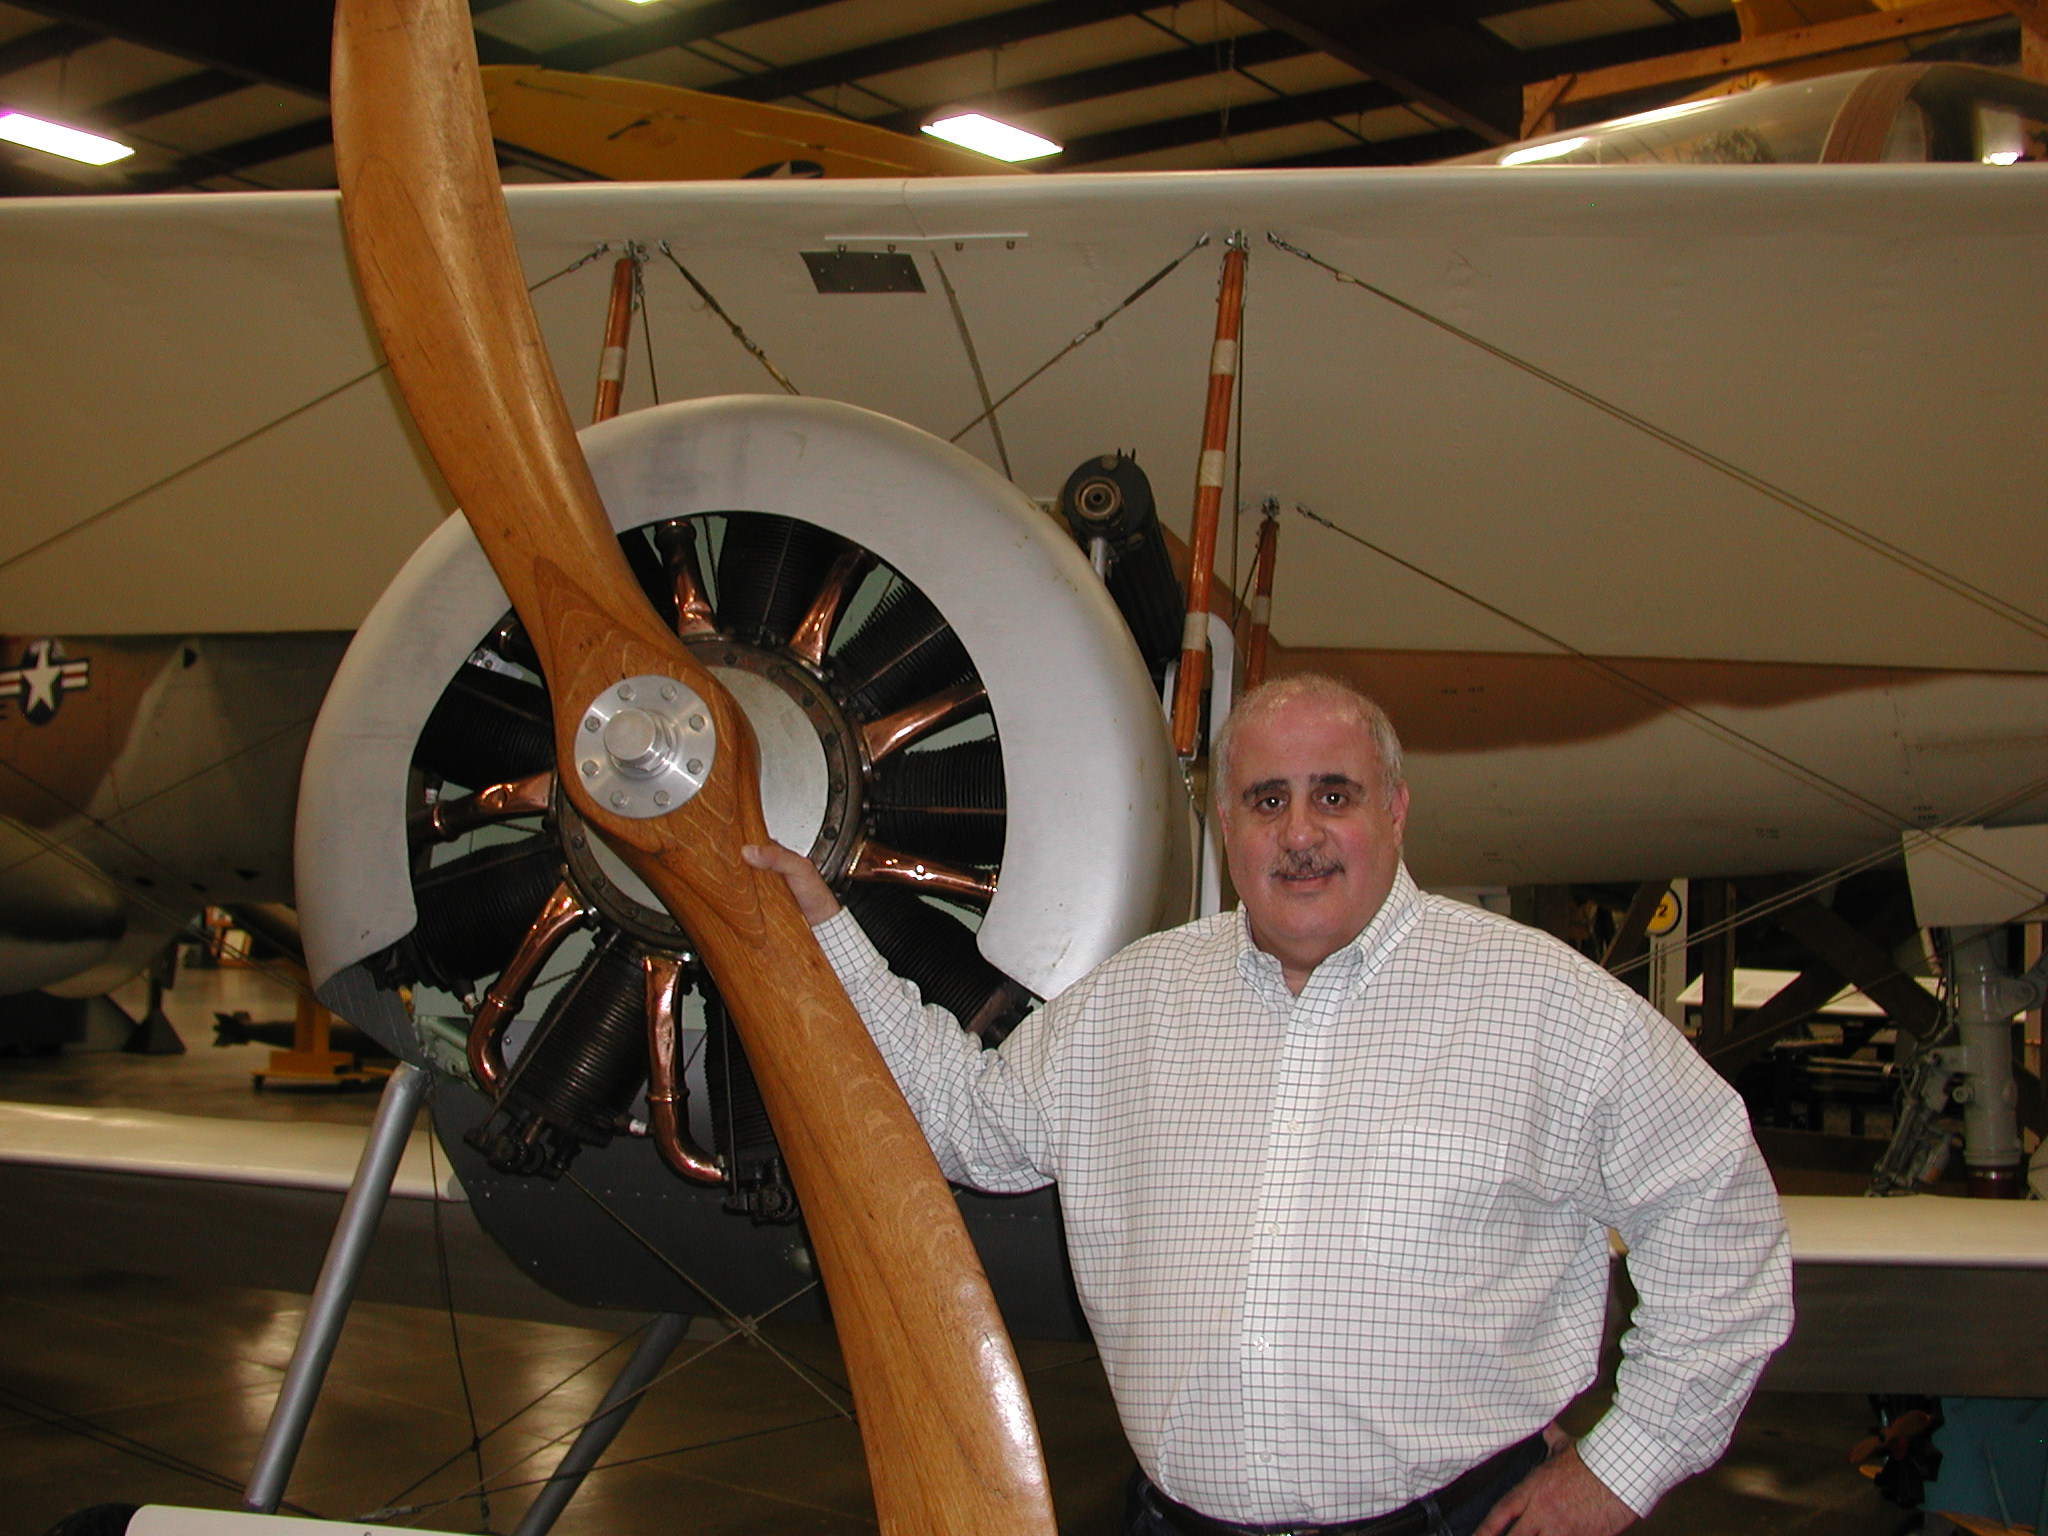 Michael P. Speciale, Executive Director of the New England Air Museum (NEAM)